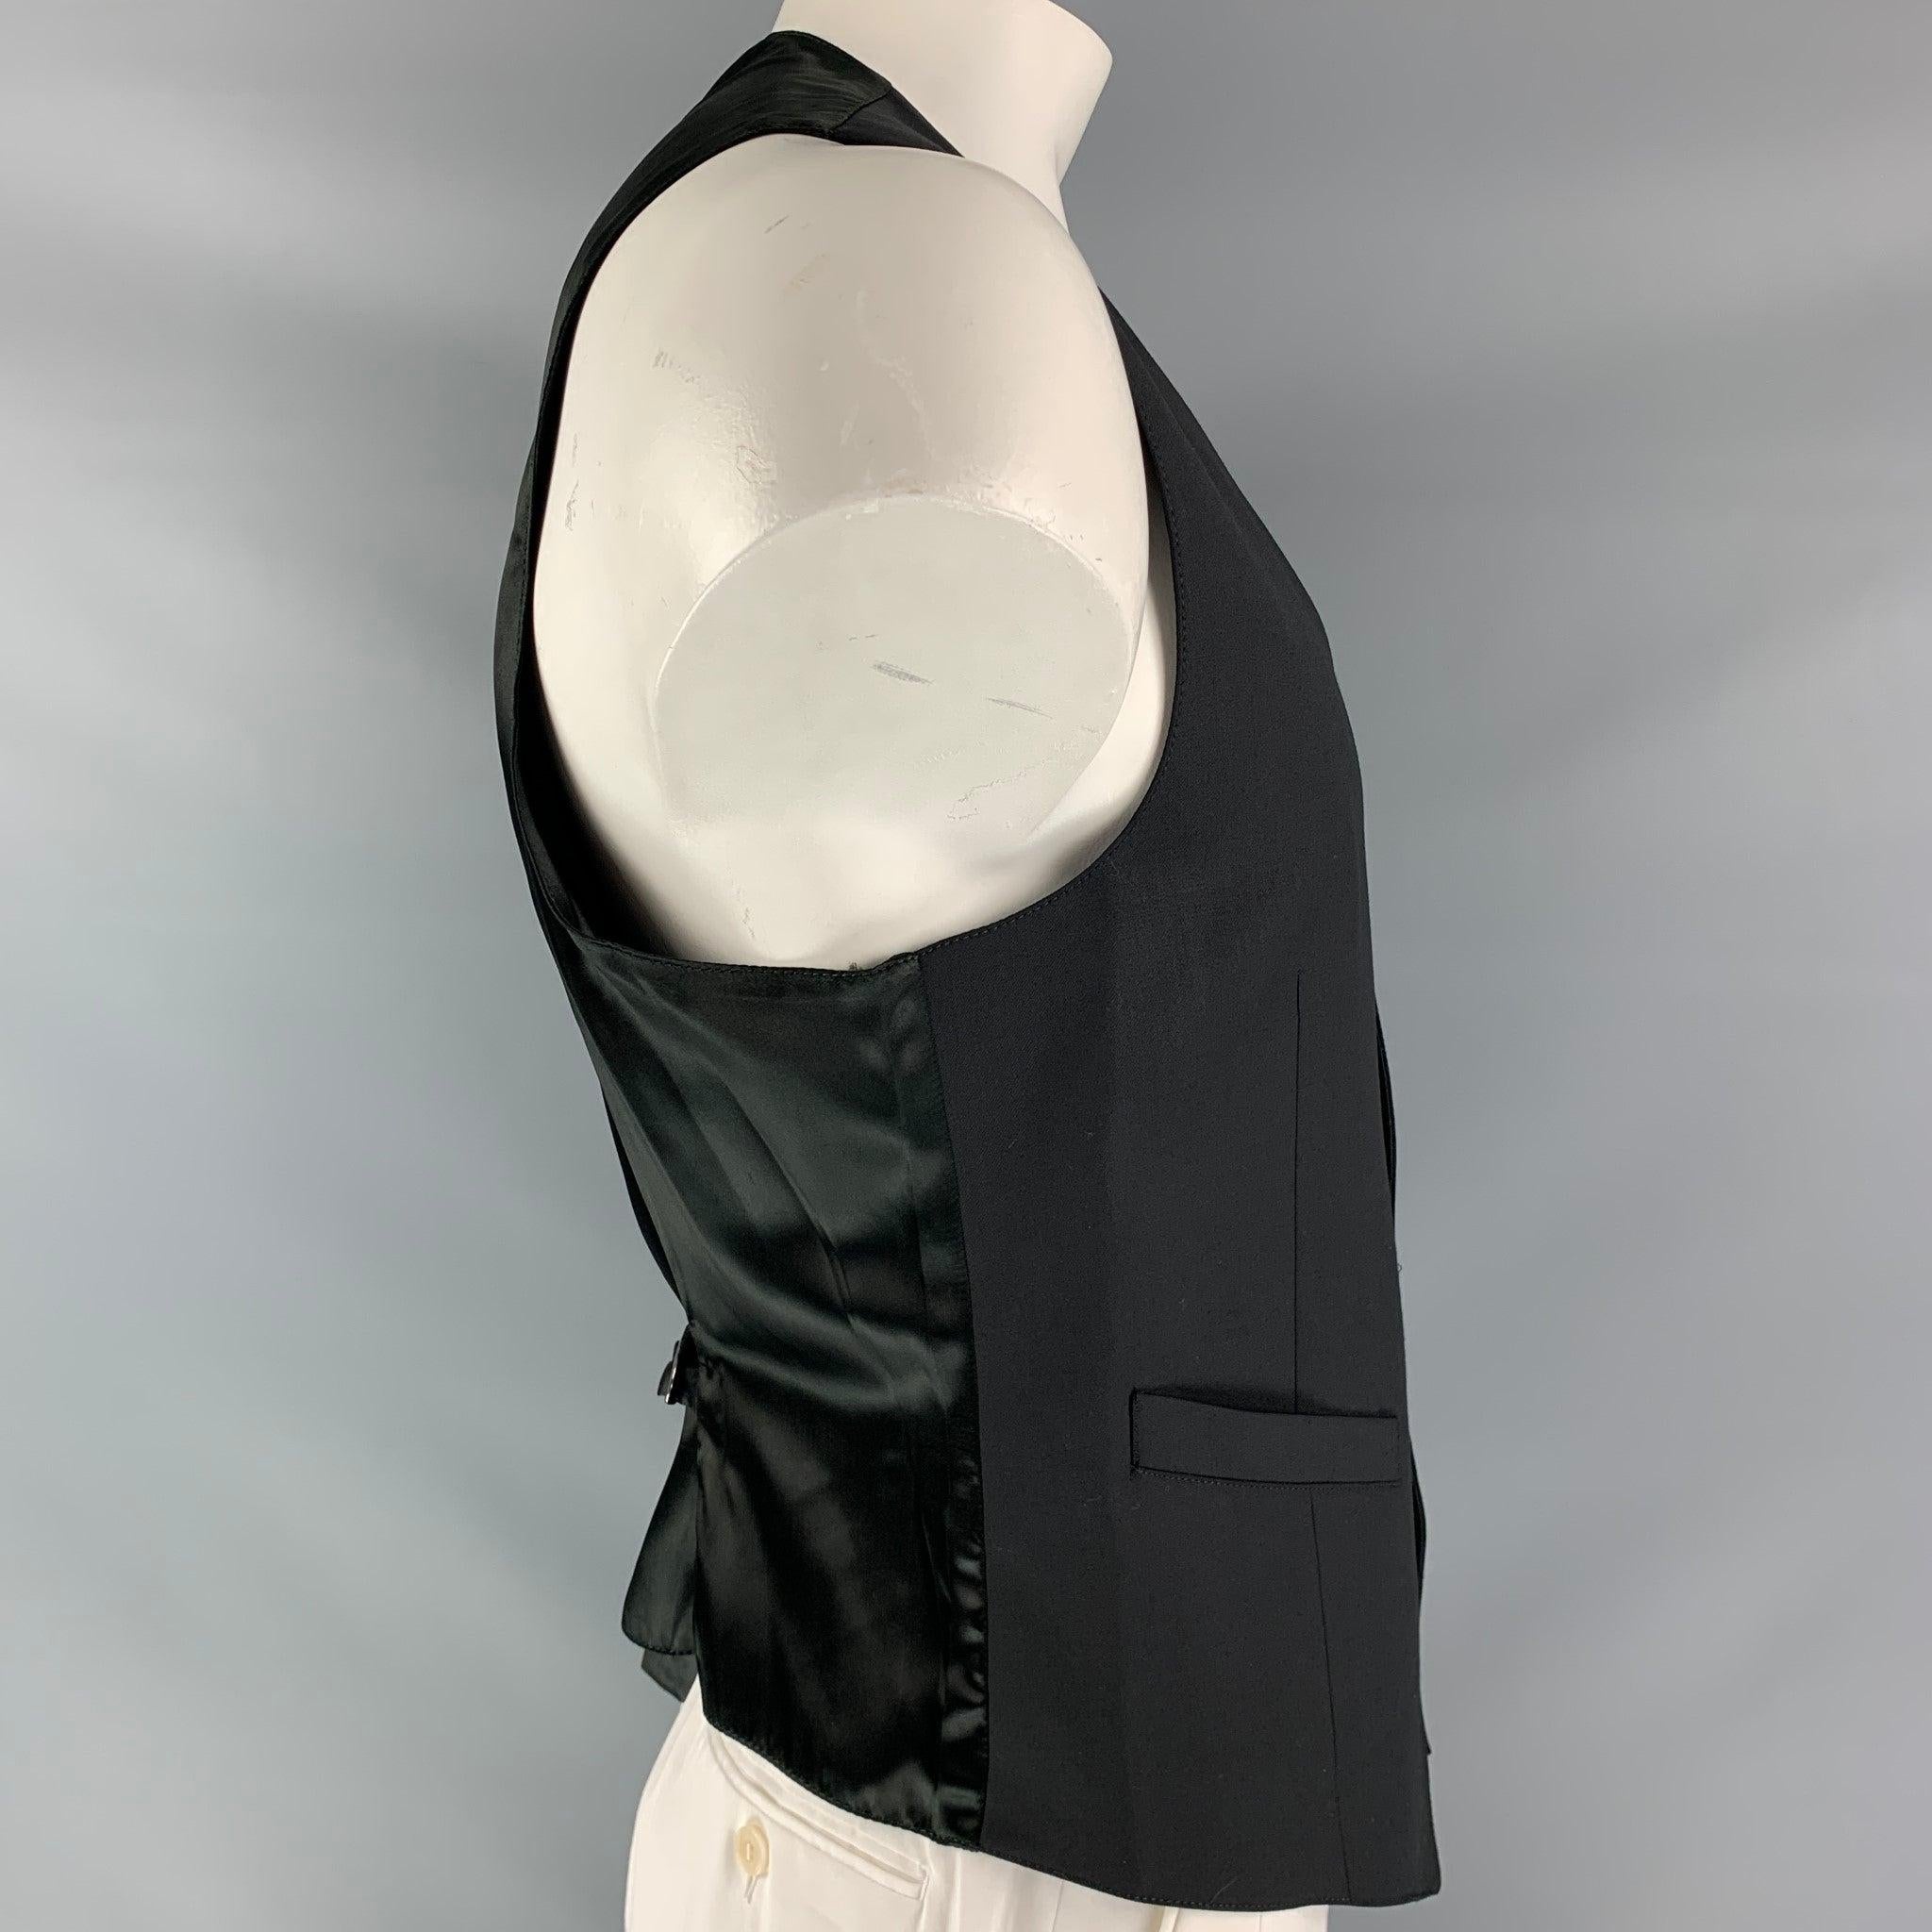 EMPORIO ARMANI green line dress vest comes in a black wool fabric, full lined featuring an asymmetric style, welt pockets, six buttons down closure, satin black fabric at back and adjustable back belt. Made in ItalyGood Pre-Owned Condition. Very